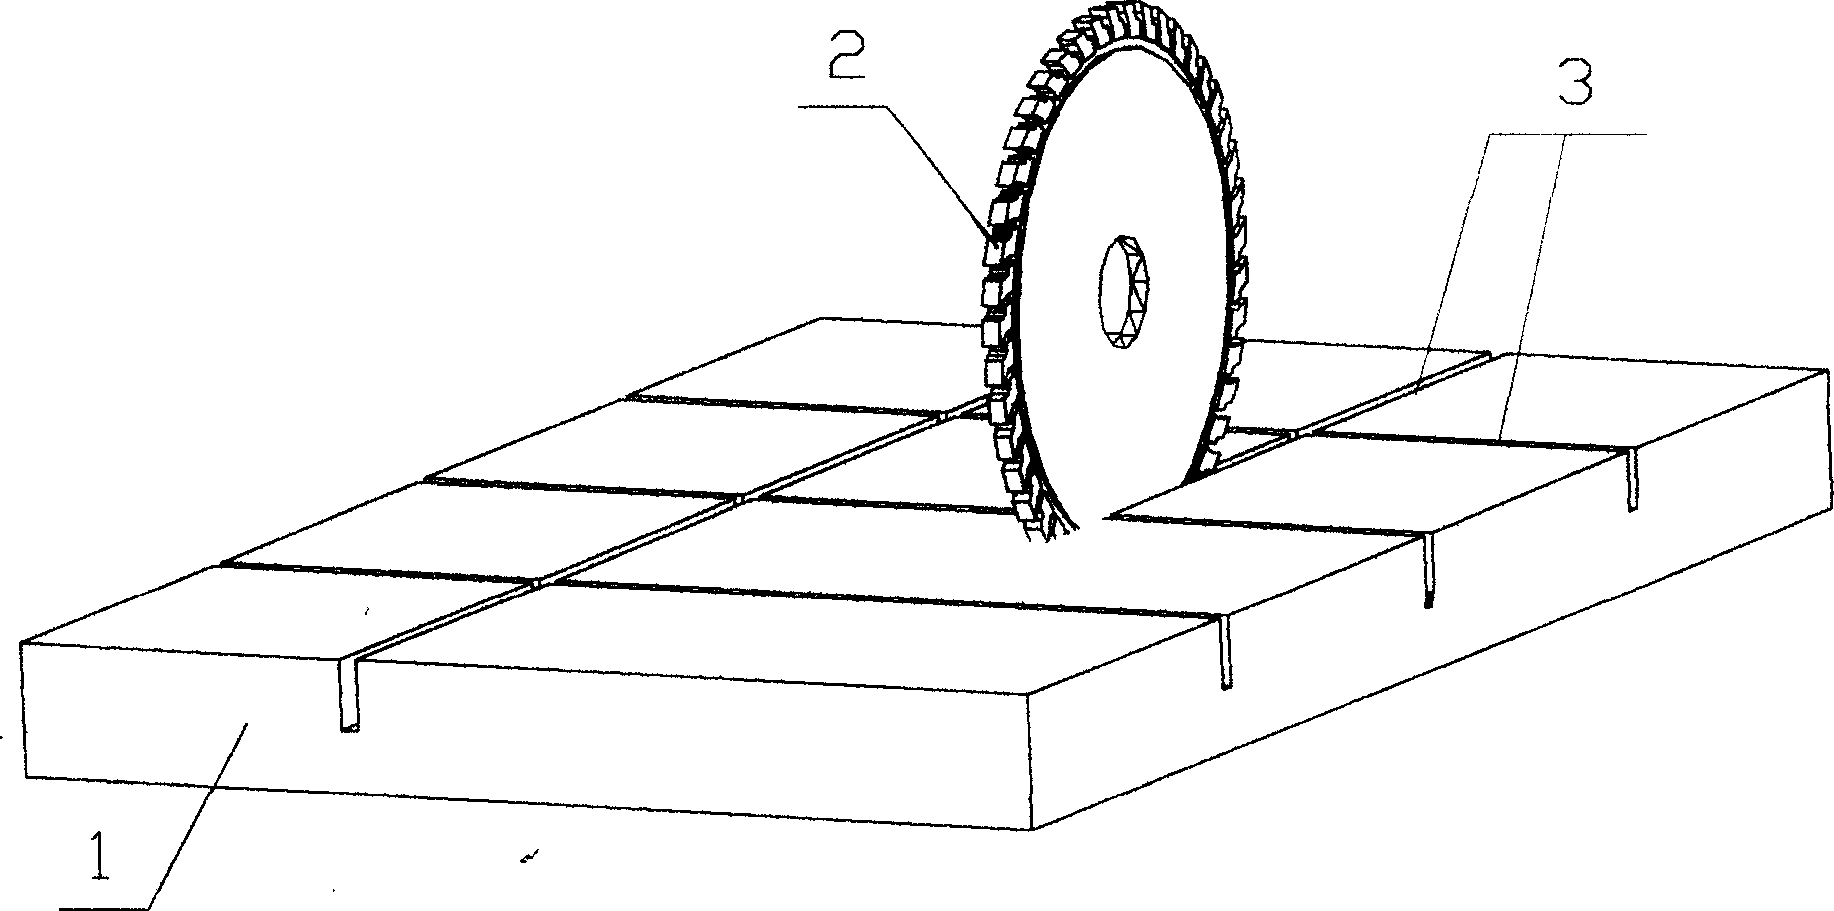 Method for cutting ultrathin dimension stone in large specification by using small circular saw blade, and dedicated leveling splitting machine